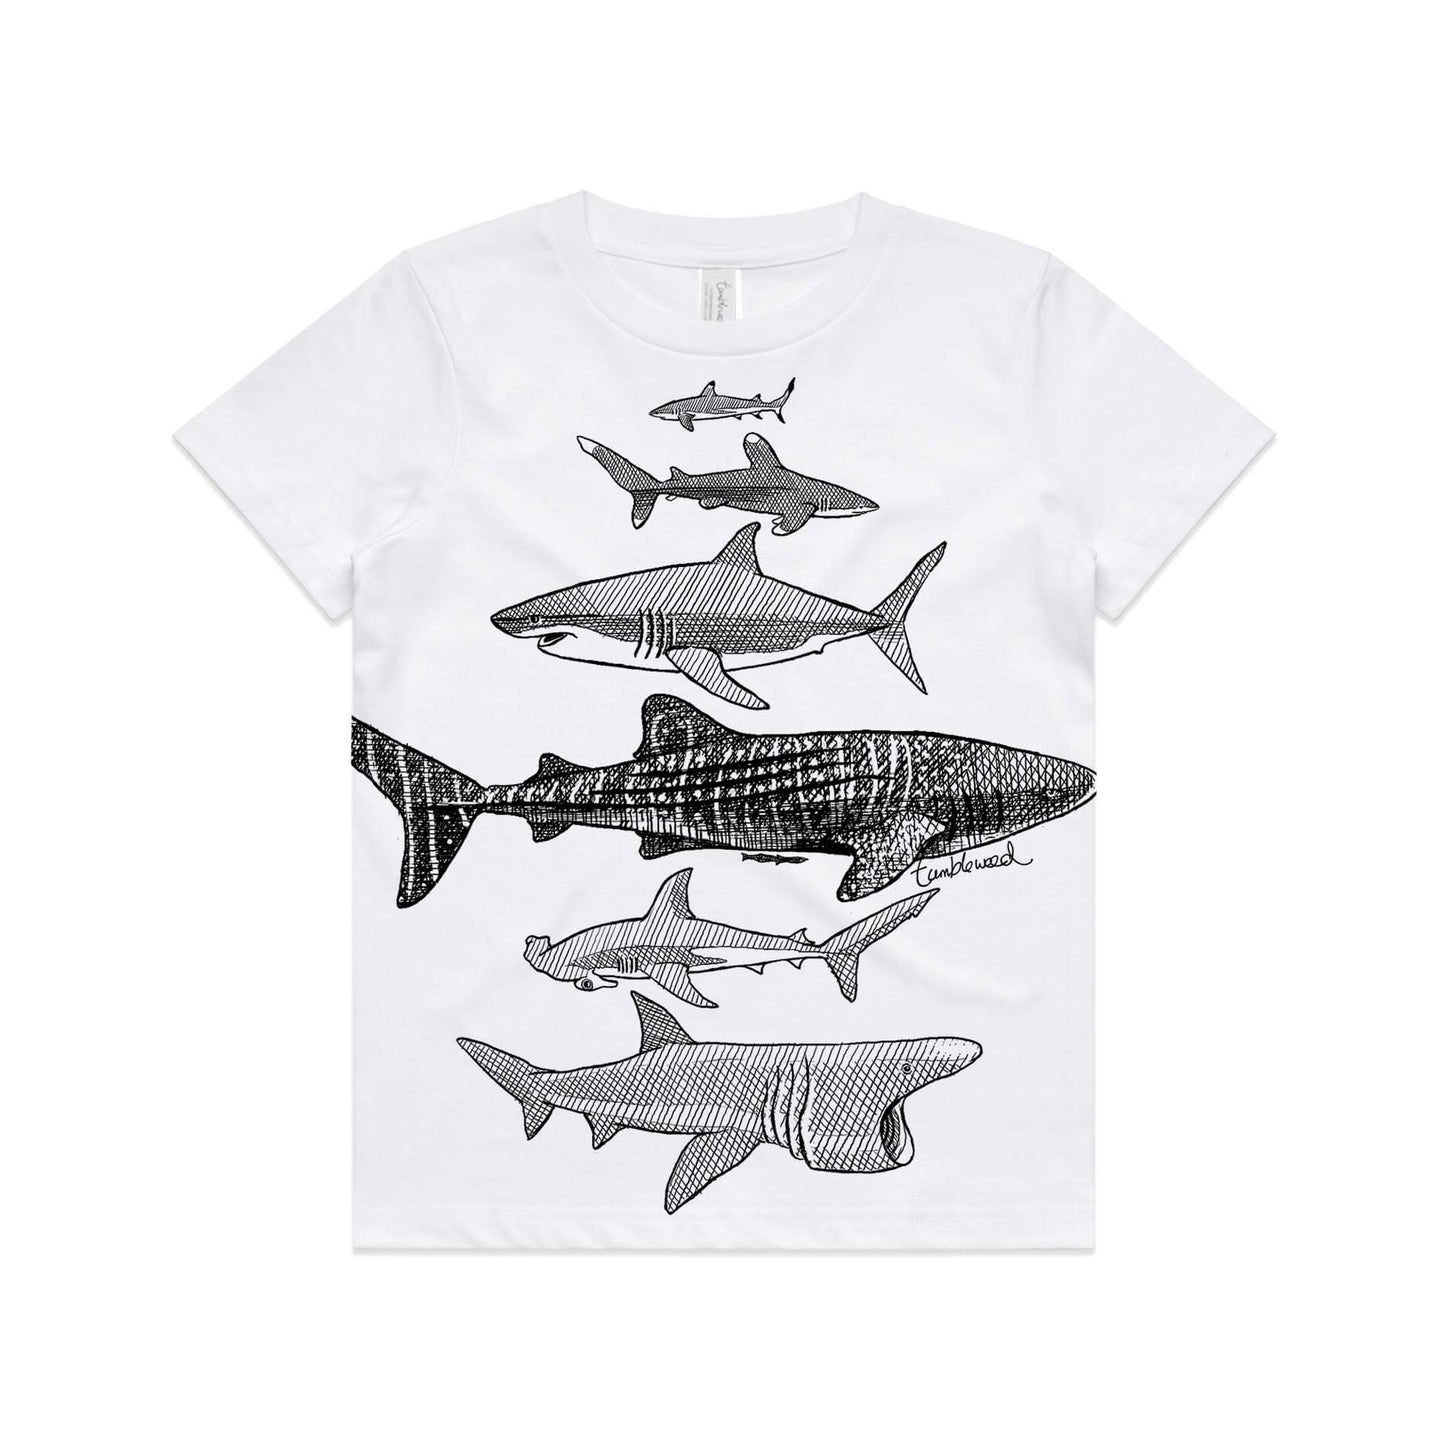 While, cotton kids' t-shirt with screen printed Kids shark design.